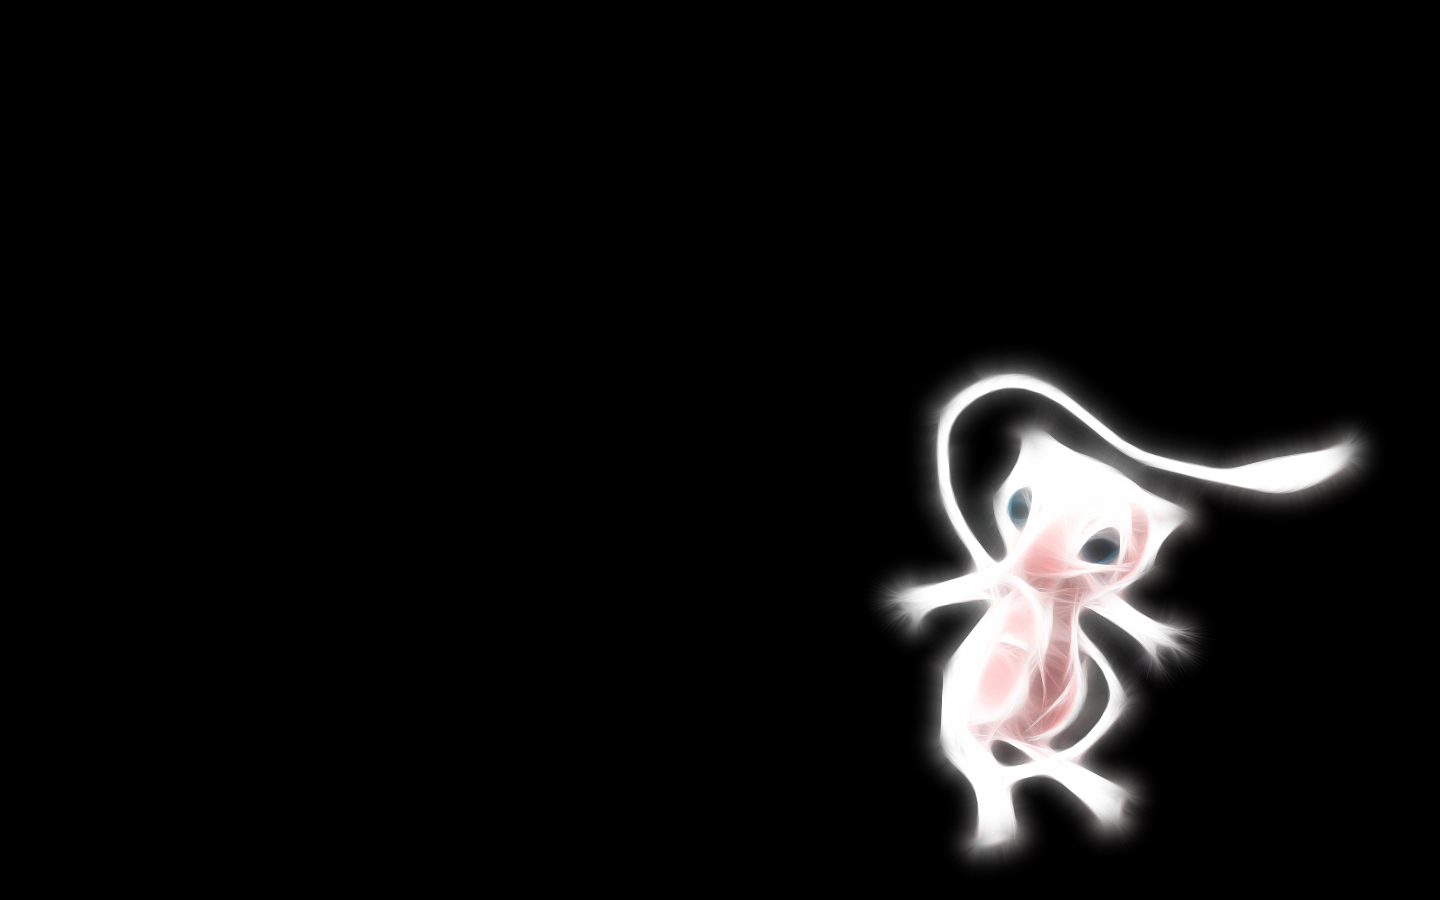 Mew Wallpaper - Background Images Black And White - HD Wallpaper 